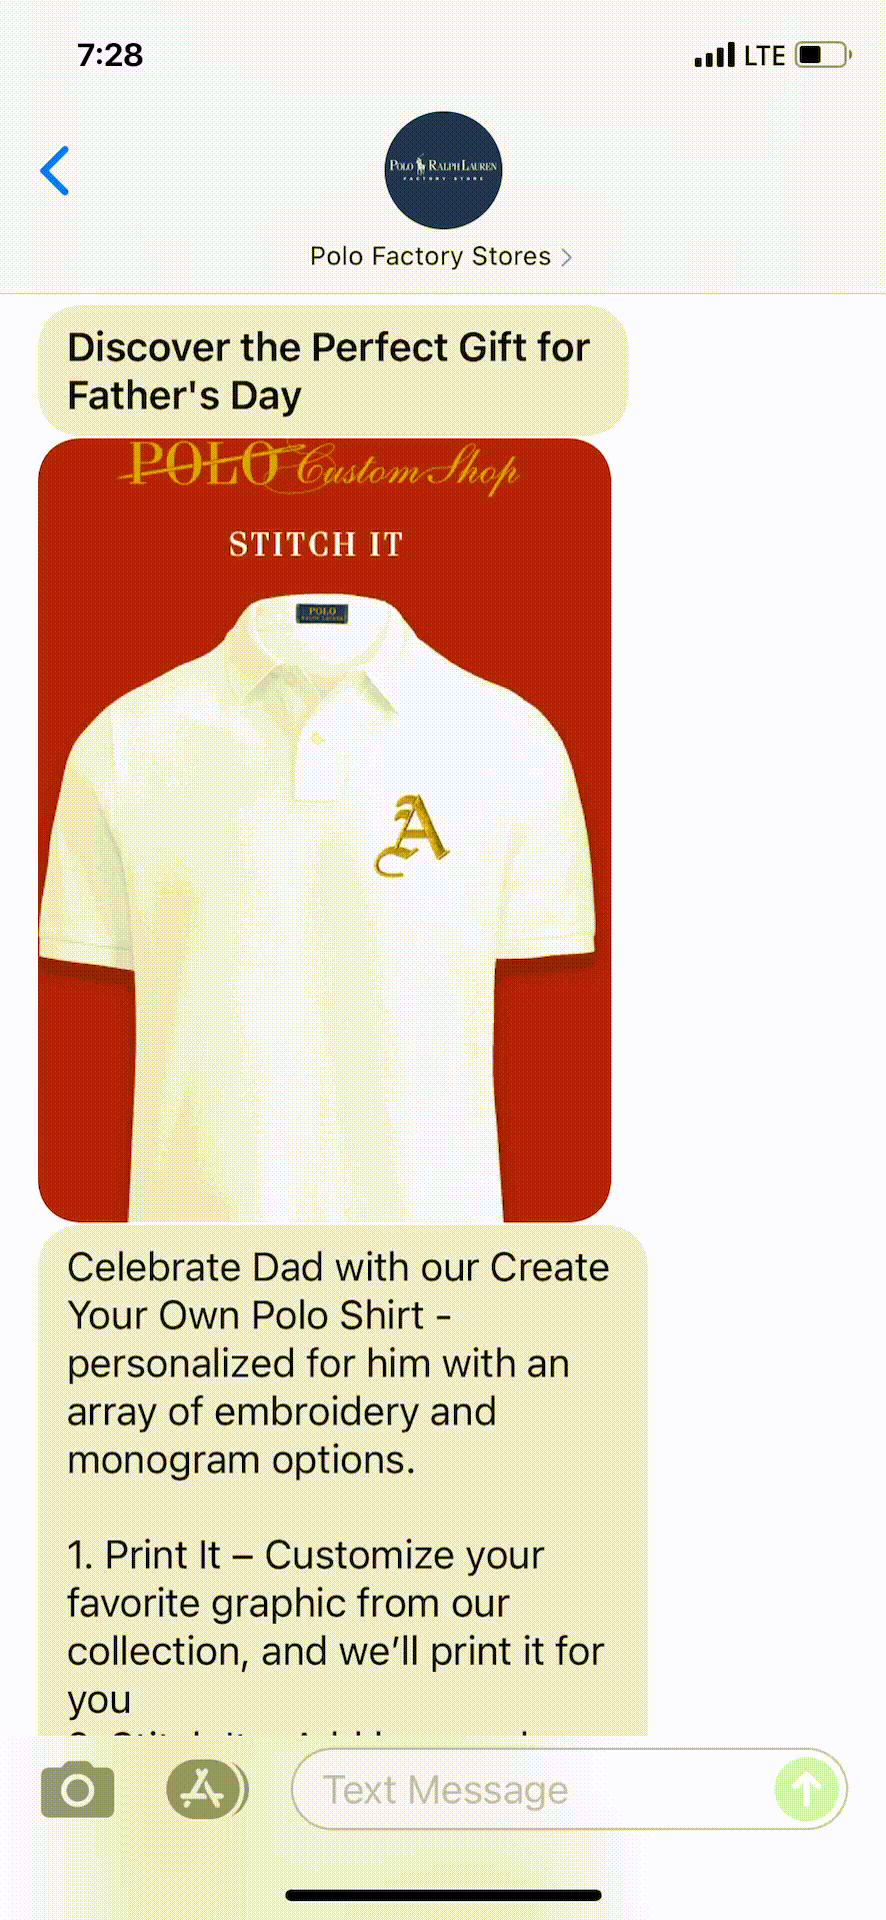 Polo-Factory-Stores-Text-Message-Marketing-Example-06.14.2021